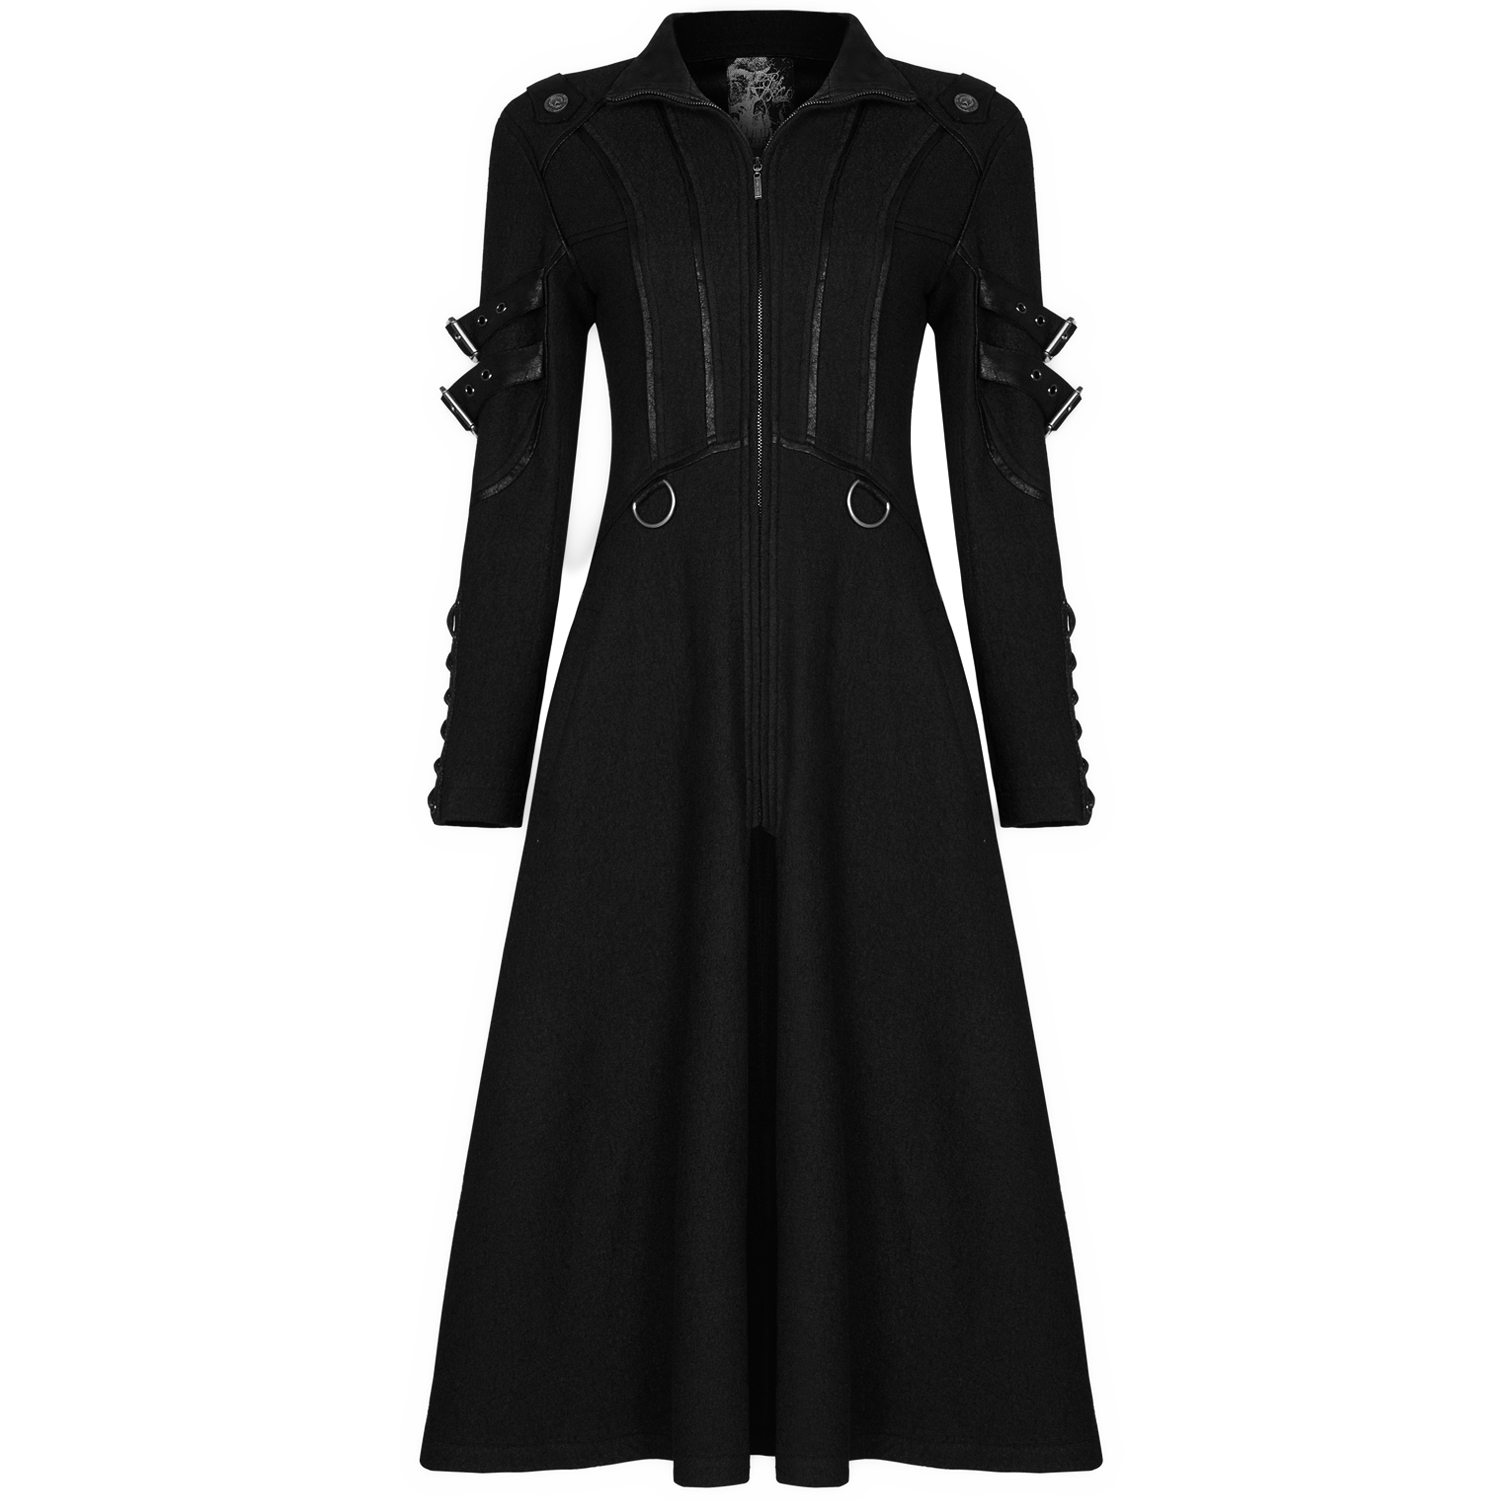 Black 'Bellona' Gothic Coat by Punk Rave • the dark store™